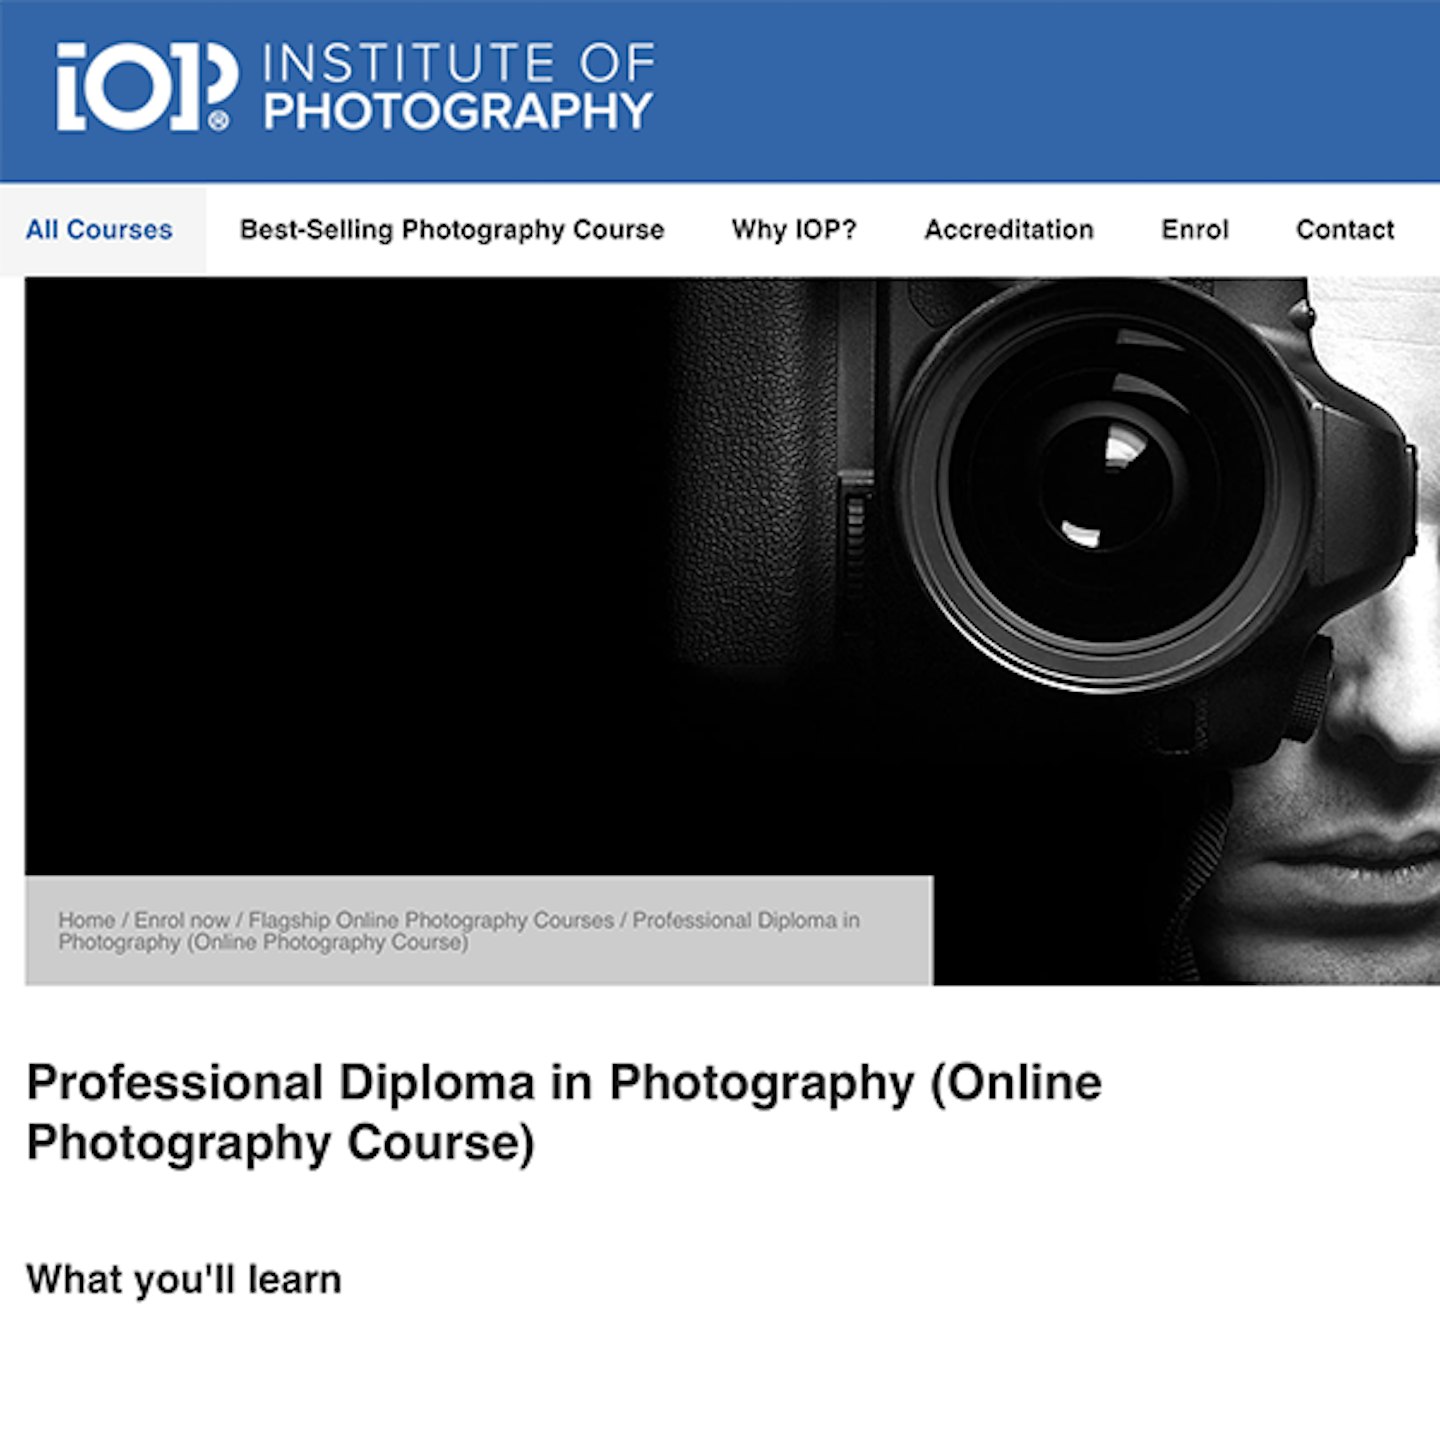 The Institute of Photography - Professional Diploma in Photography (Online Photography Course)